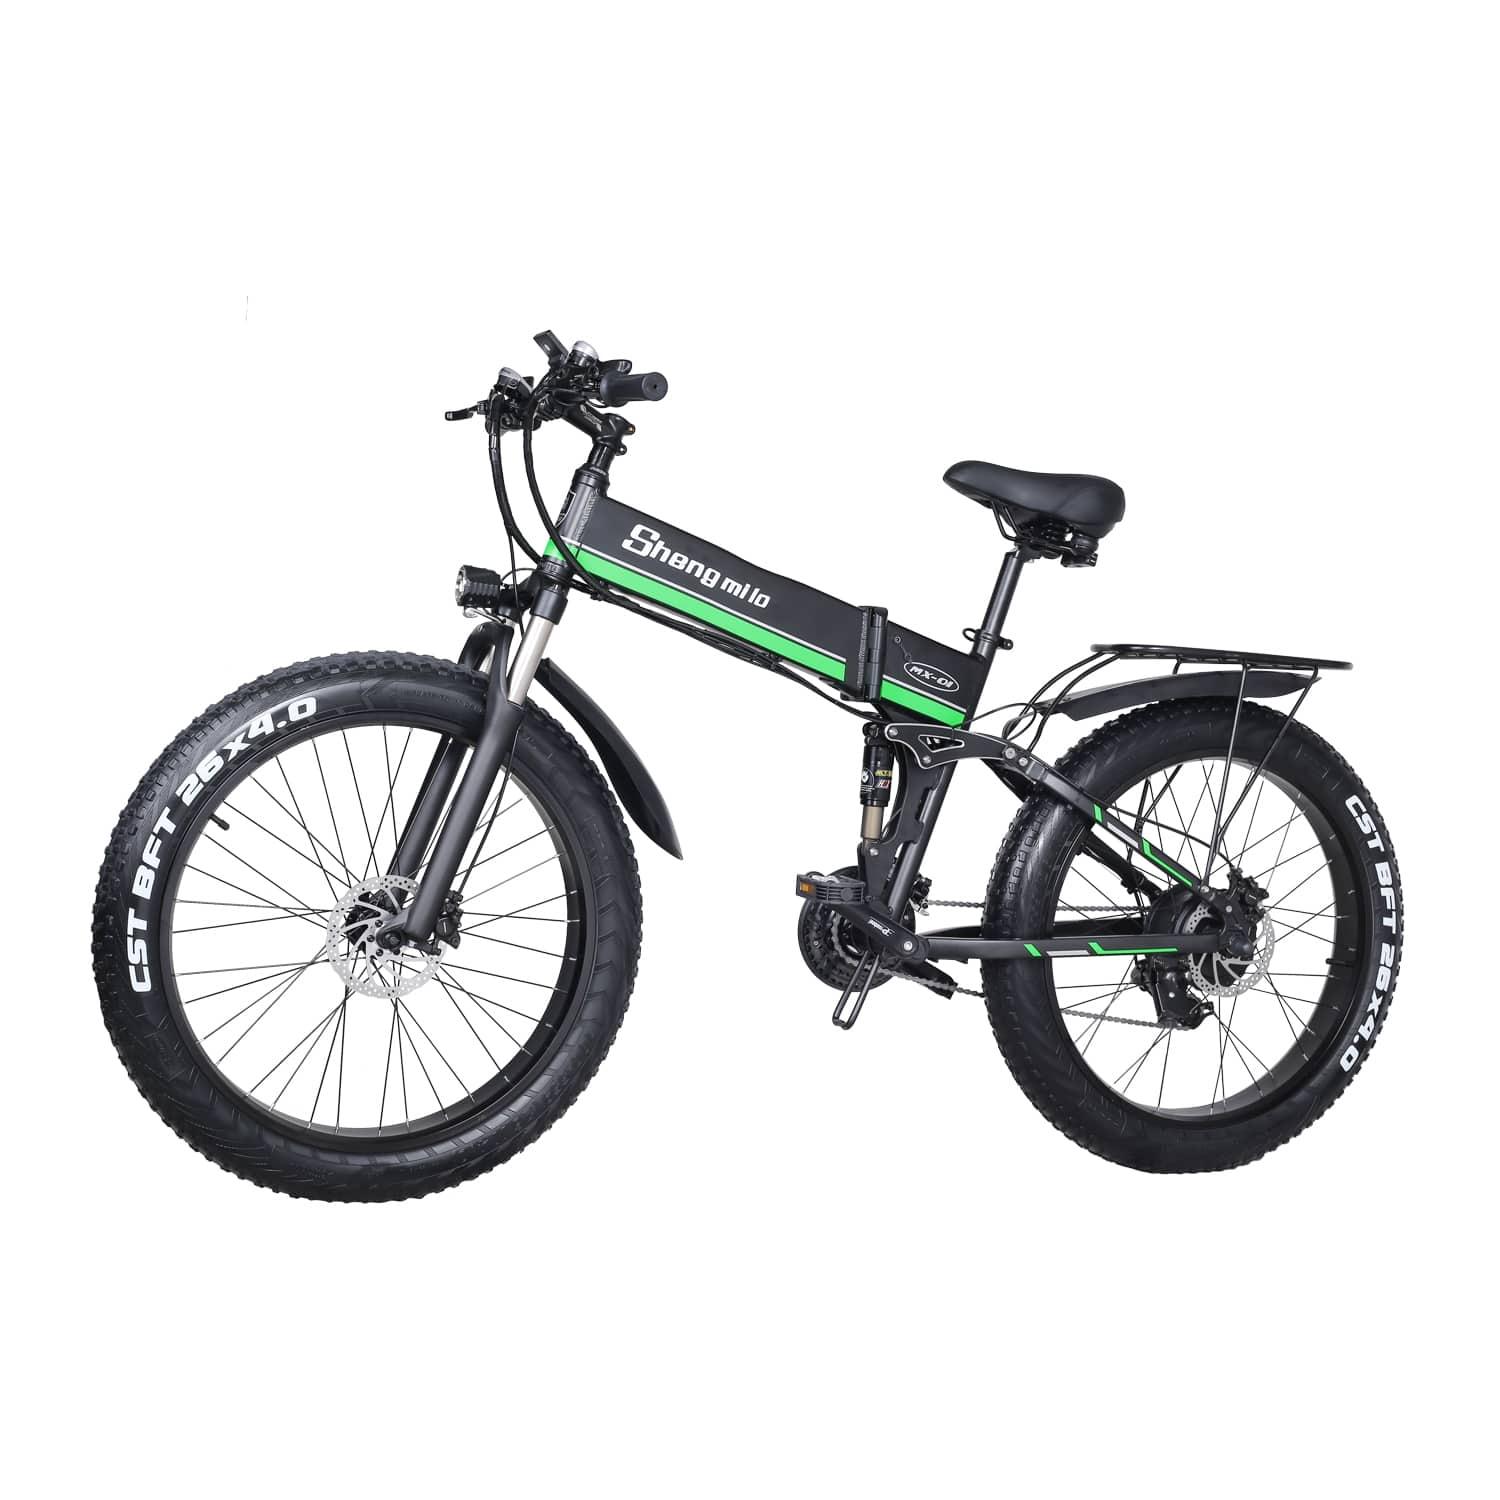 Shengmilo MX01 - Pogo cycles UK -cycle to work scheme available